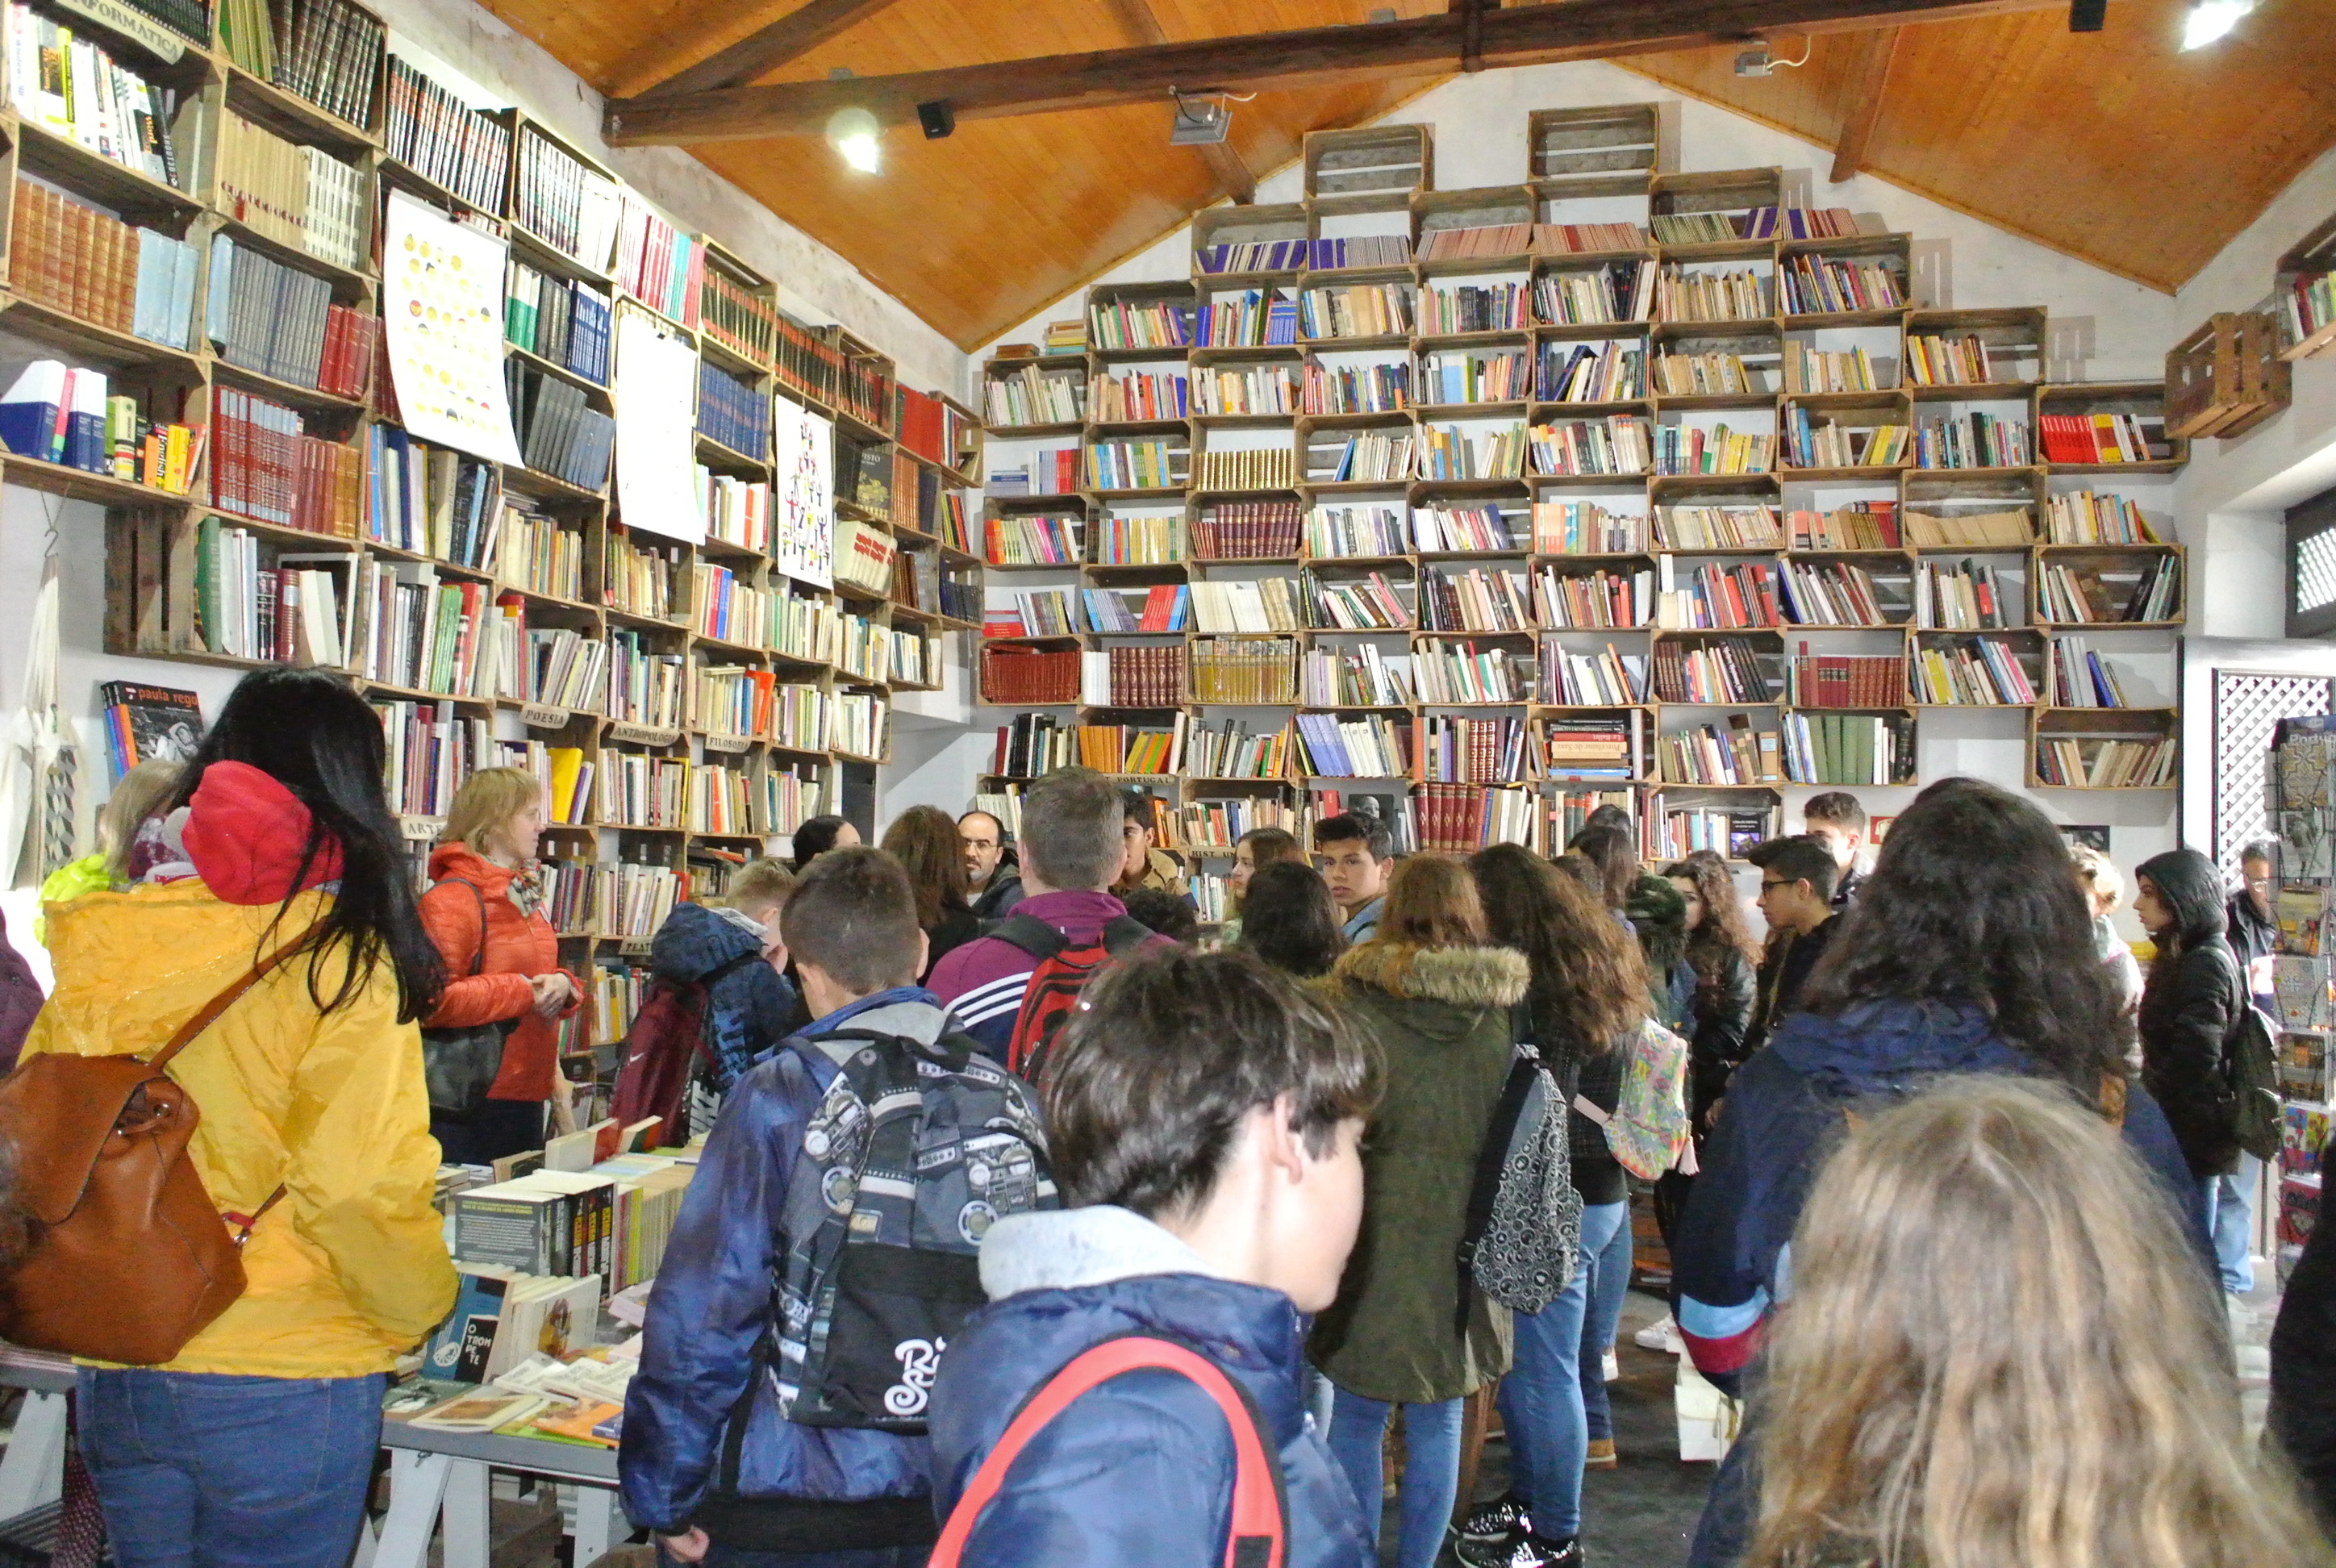 READING WITHOUT BORDERS - Bulgaria